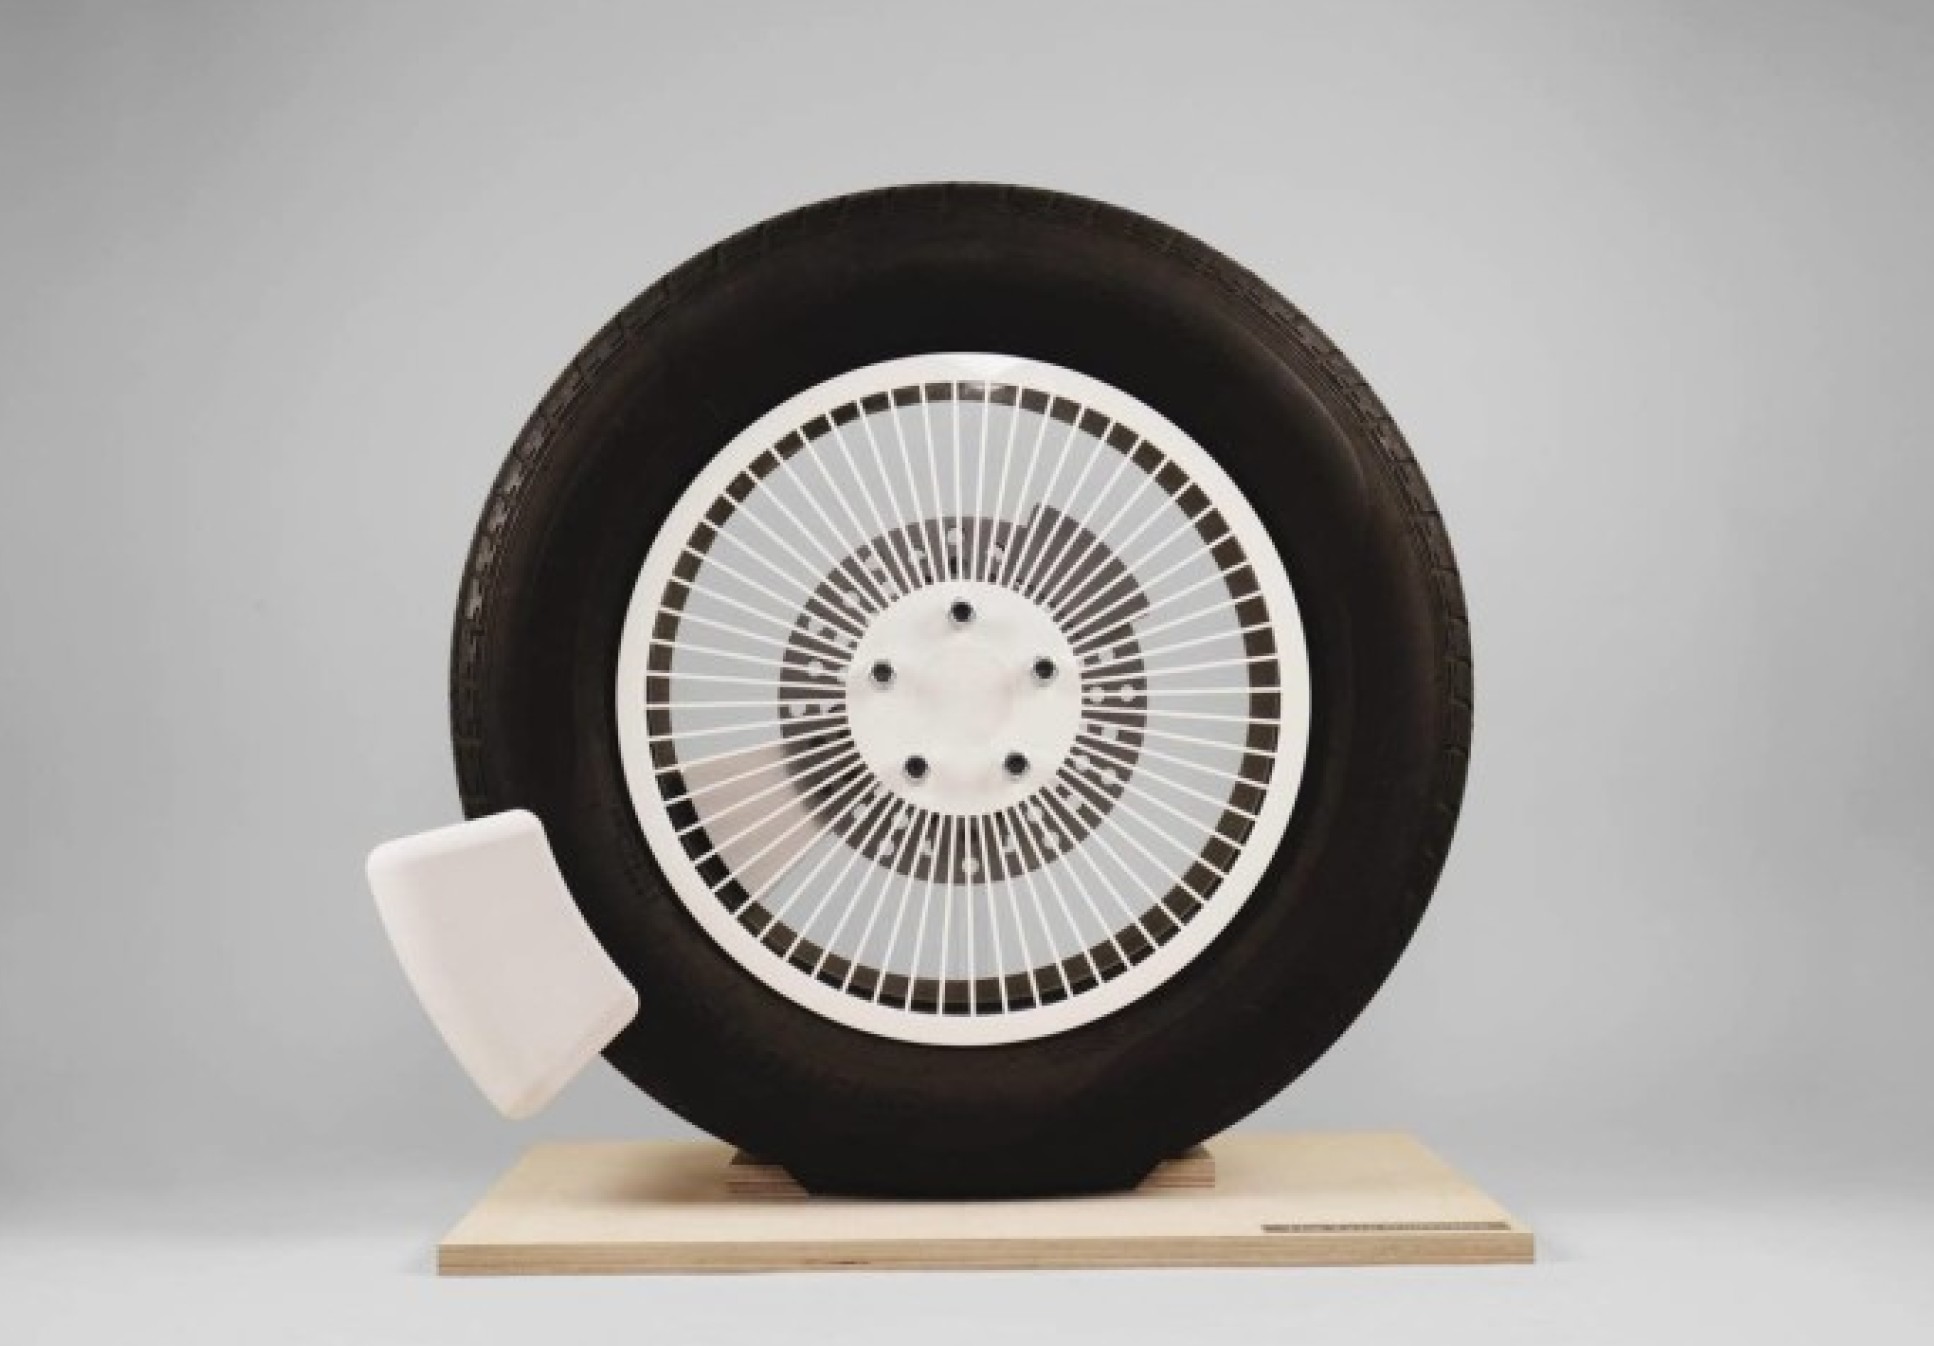 The Tyre Collective's wheel device